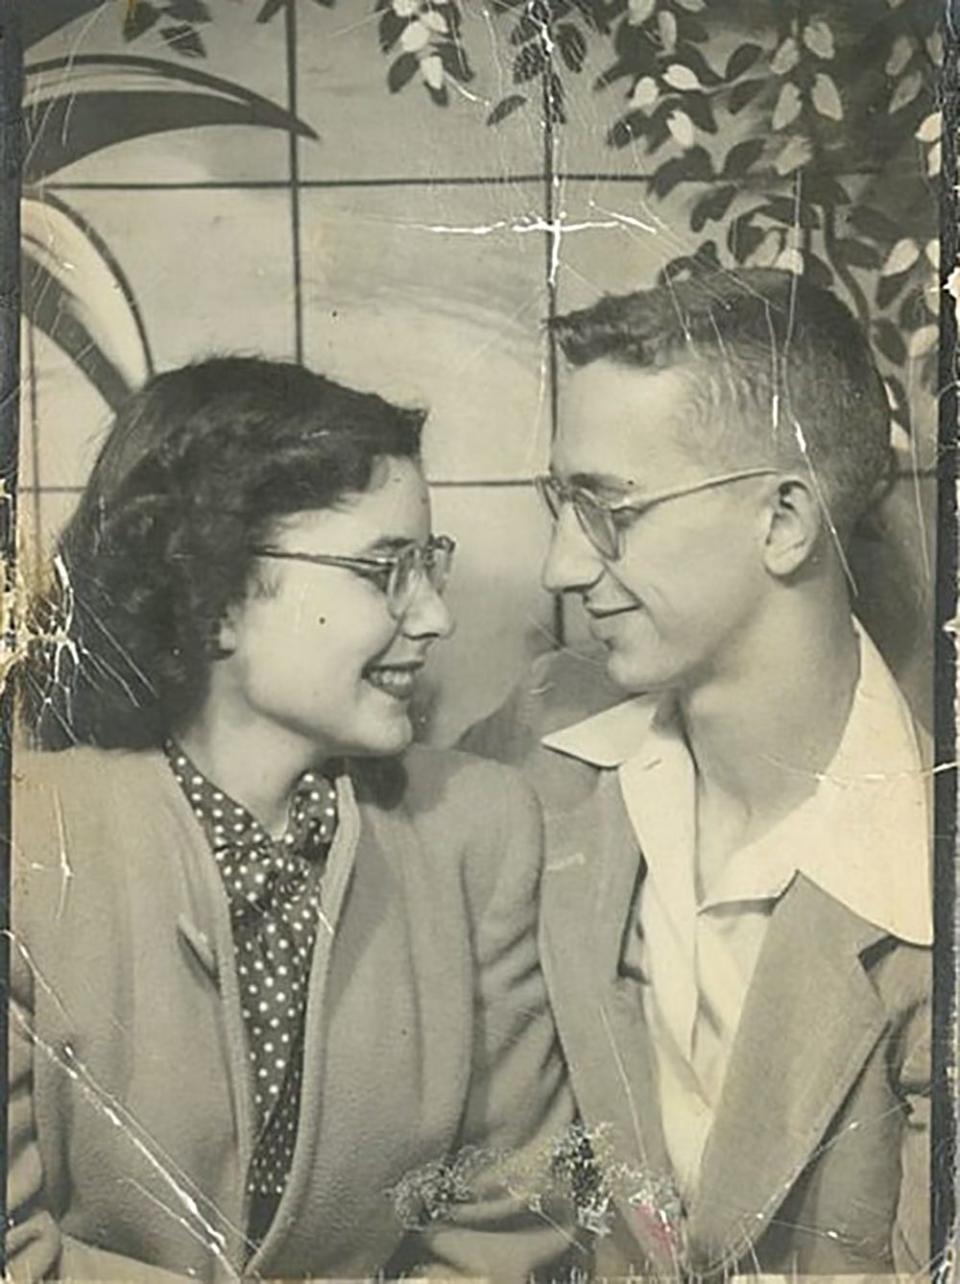 A picture of Jim and JoAnn Grubb from a photobooth around the time they got married in 1948.